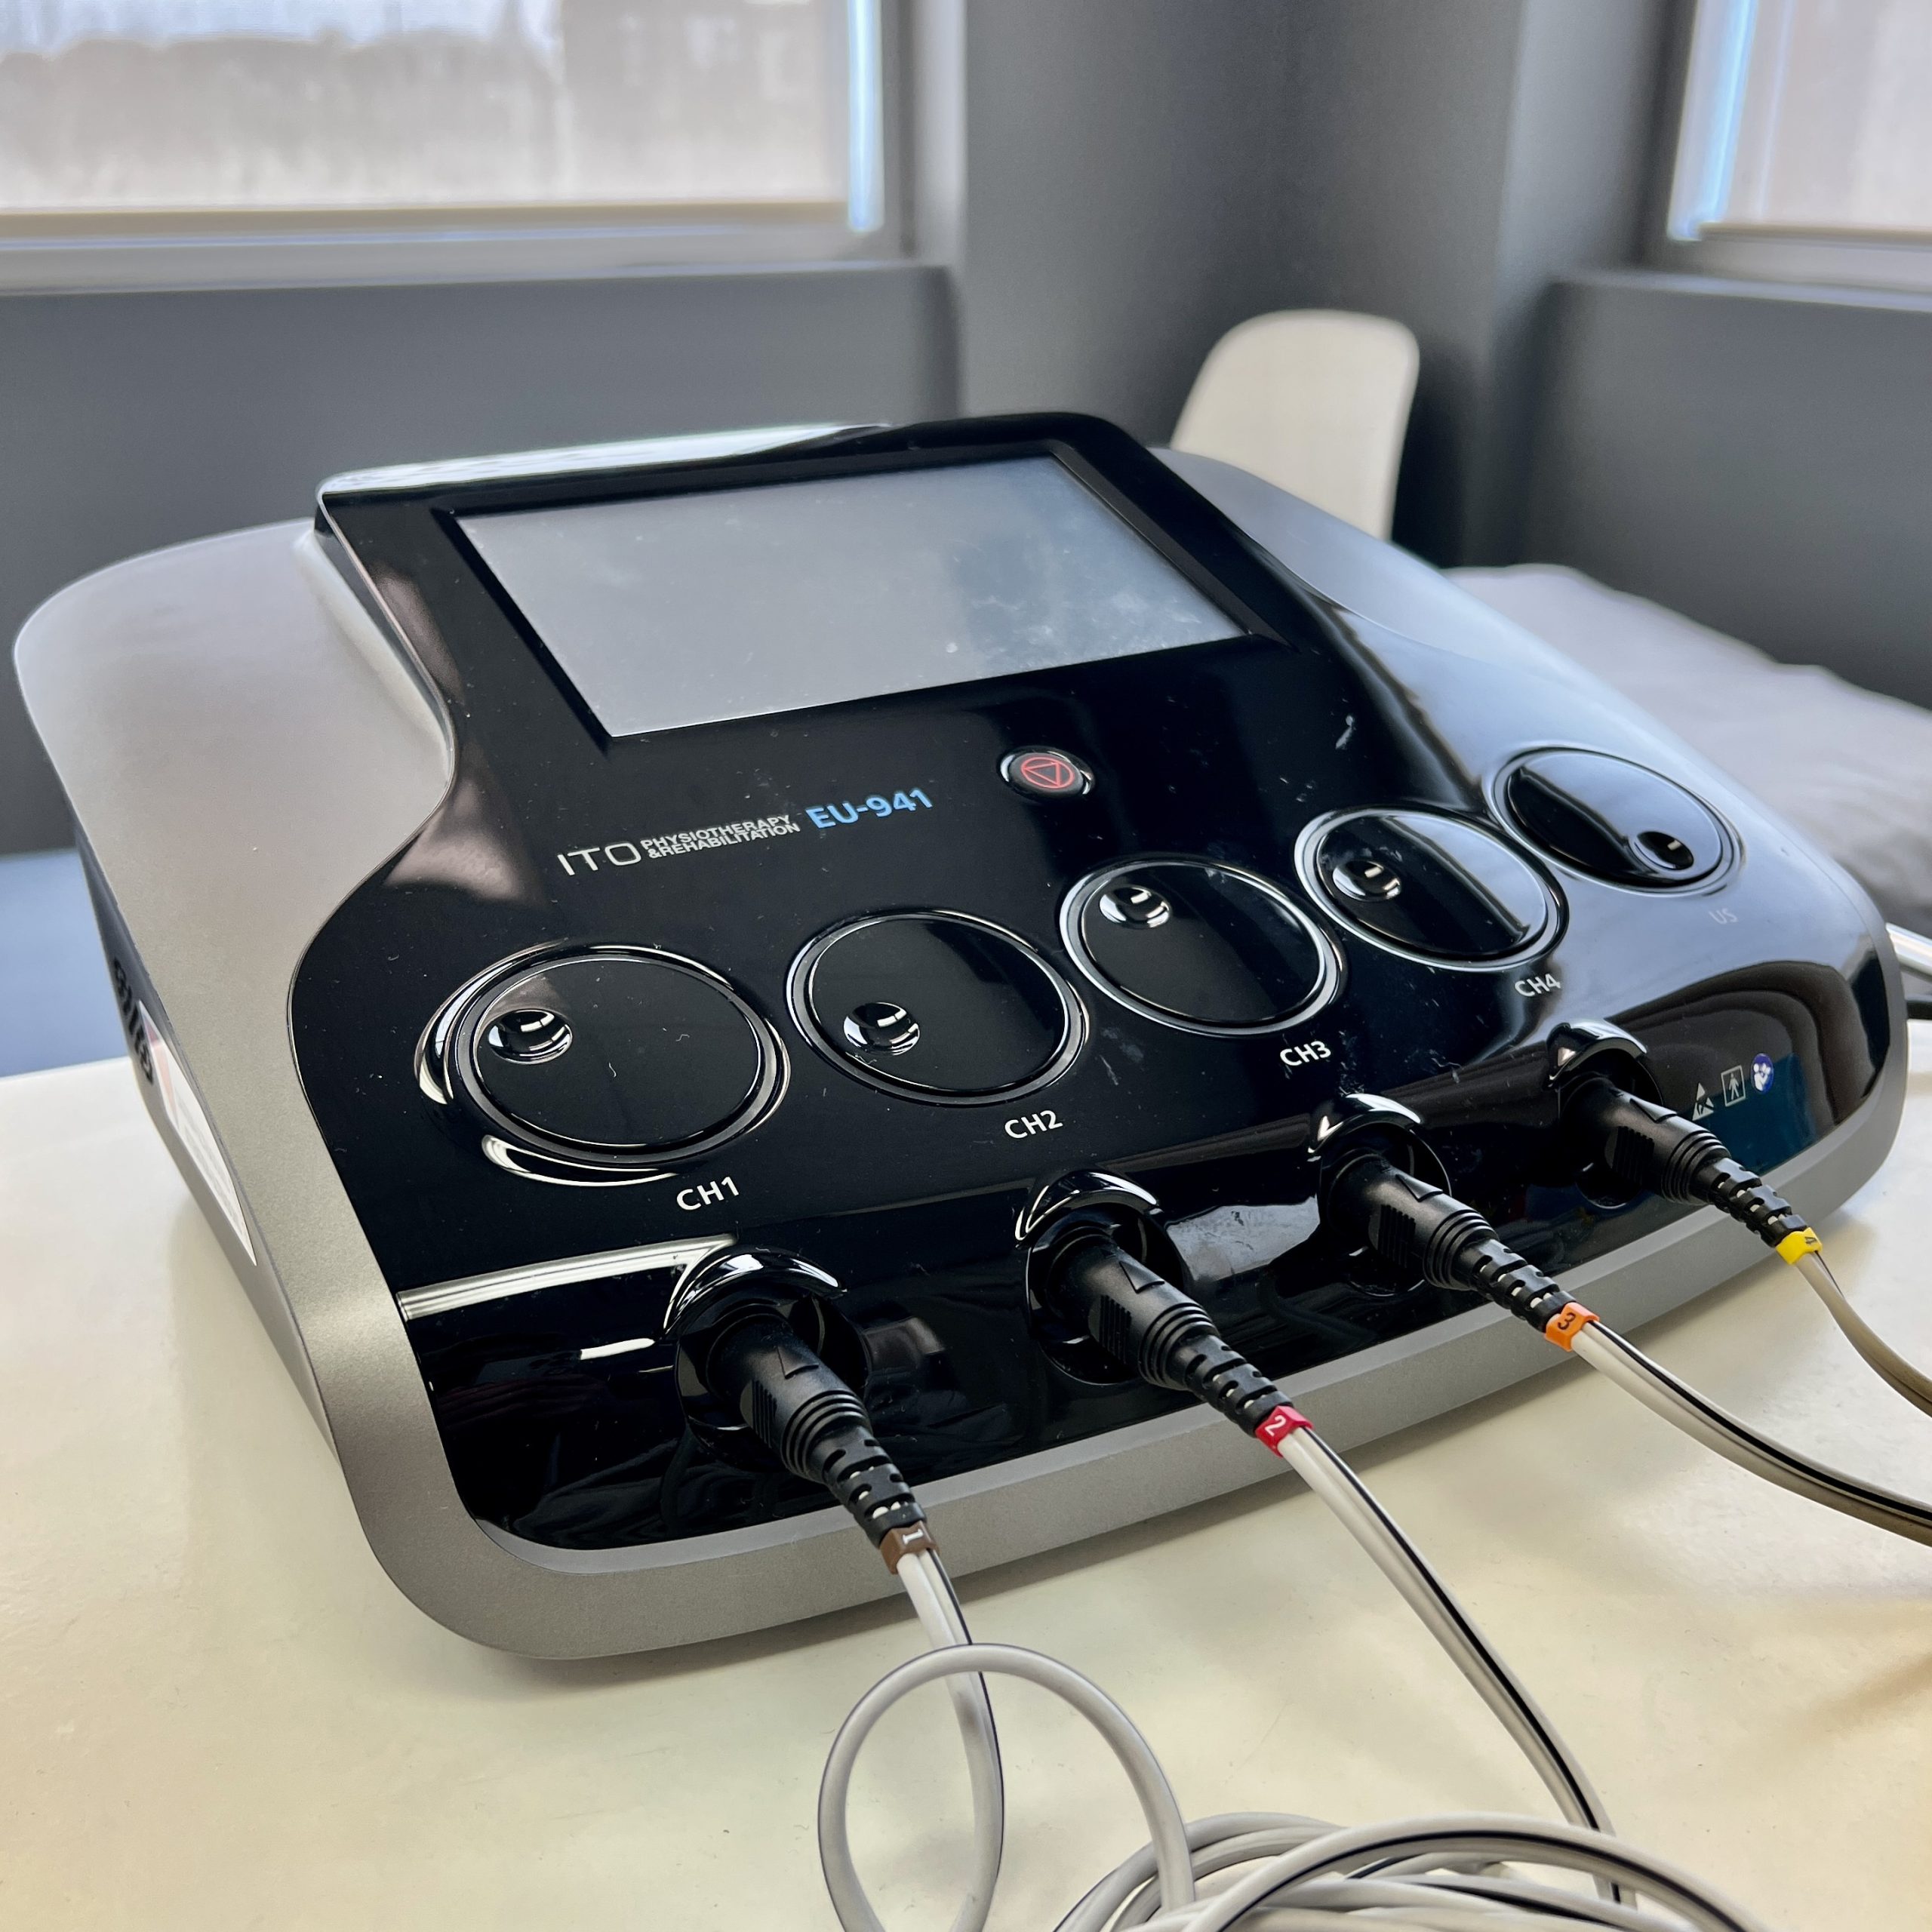 An image of the ITO EU-941, which is an ultrasound and electrotherapy combo, with 4 channels for the electrotherapy, used at the PhysioCore & Sports Rehab physiotherapy clinic.